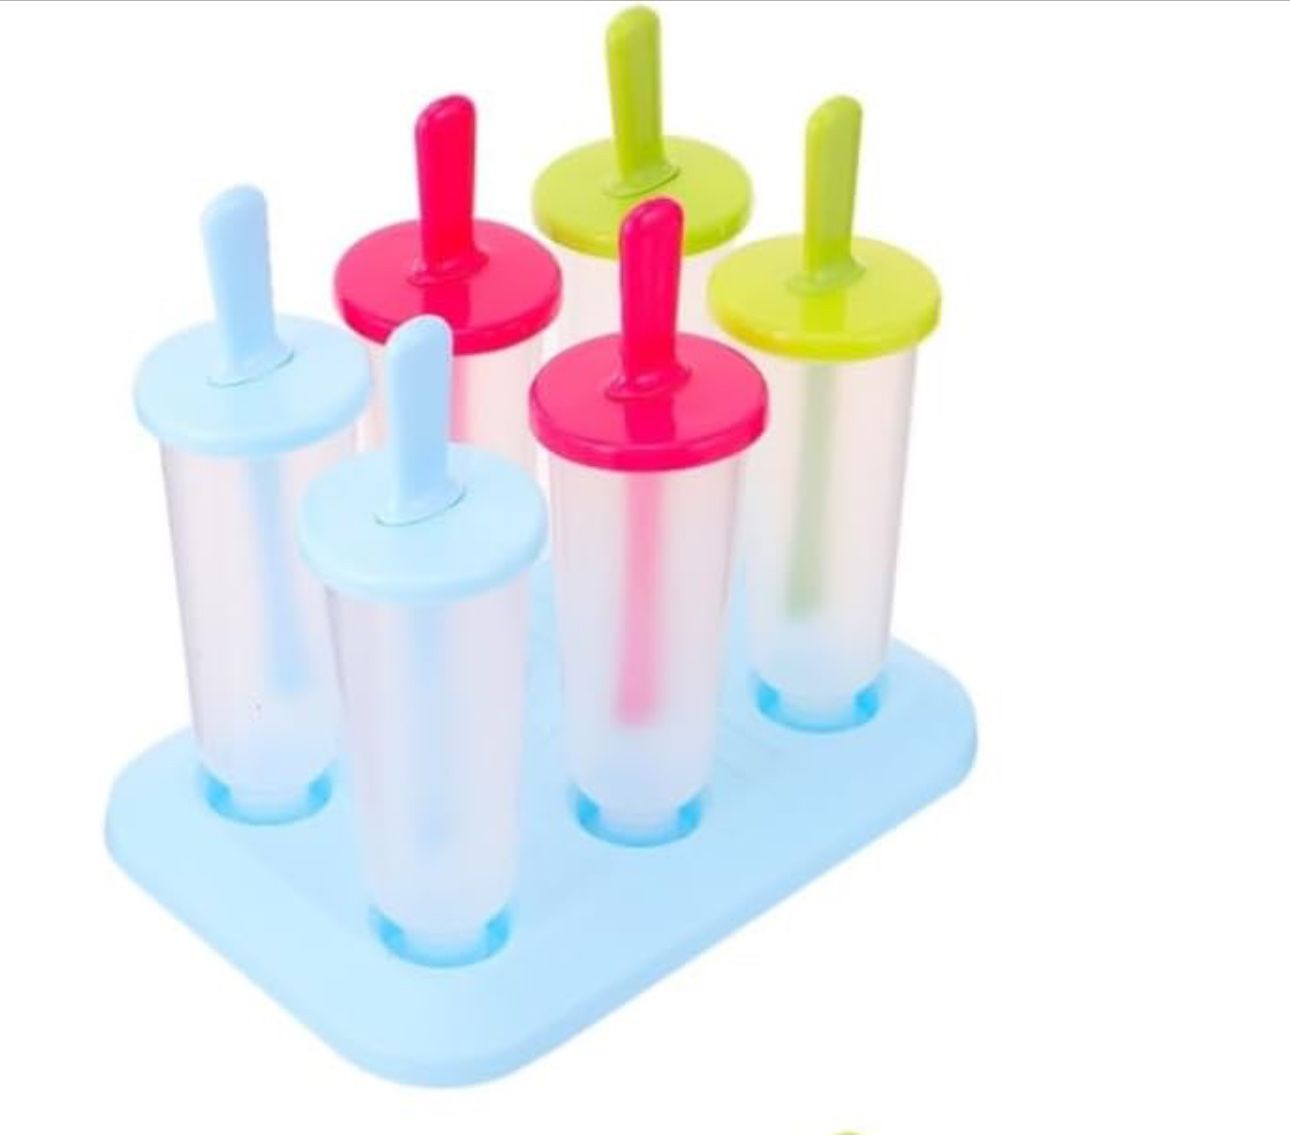 Lolly Moulds Yogurt Stick  Ice Stick Mold Diy Ice Cream Mold Ice Cube Trays Ice Pops Shaper Tray Mold Pudding Mold Summer Popsicle Mold